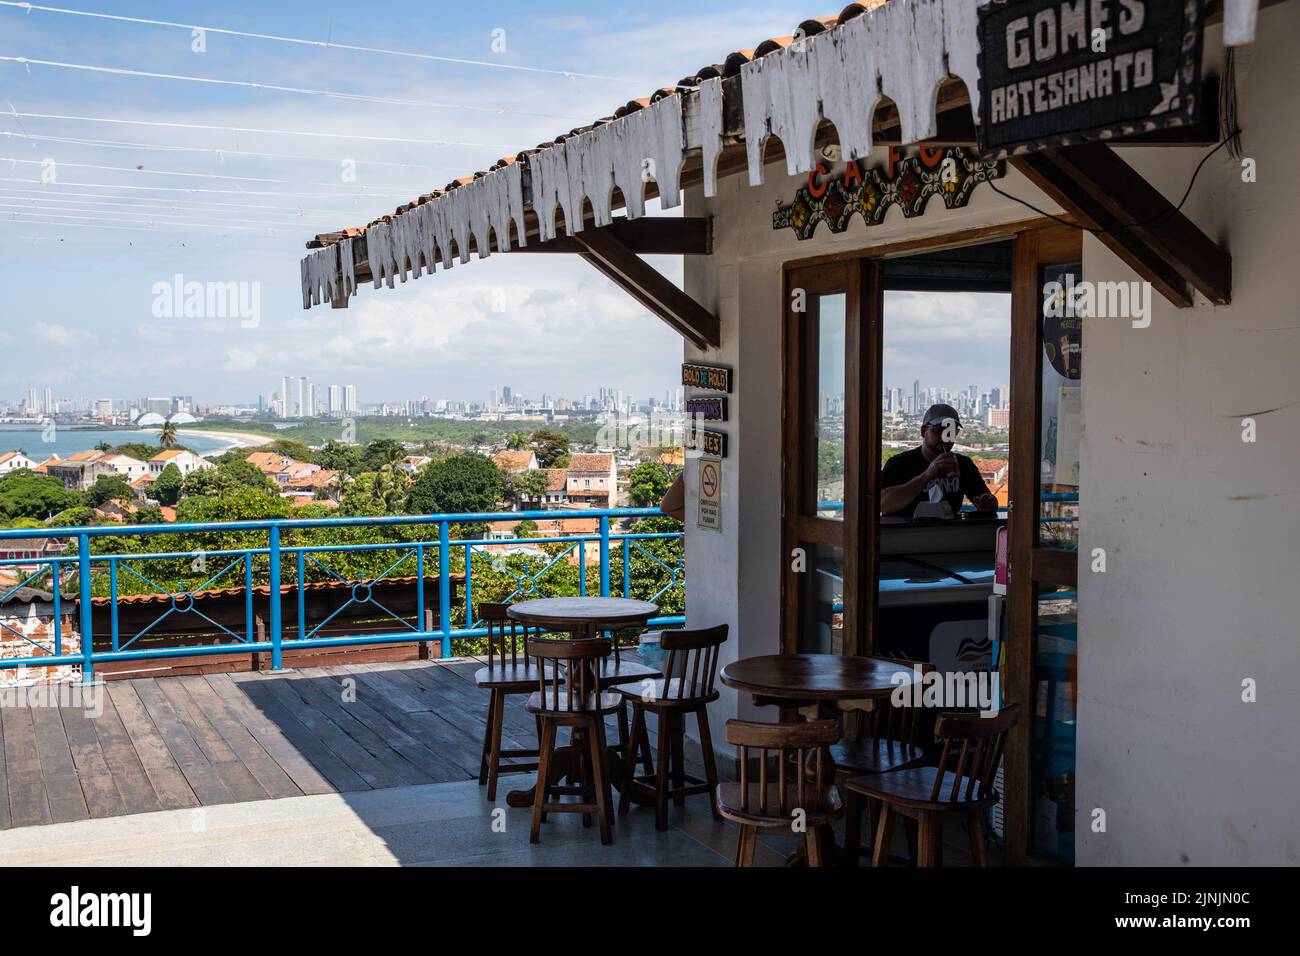 Olinda, Brazil. 11th Aug, 2022. A tourist drinks beverage at a restaurant in Olinda, Brazil, Aug. 11, 2022. The Historic Centre of the Town of Olinda was inscribed on the UNESCO World Heritage List in 1982. Credit: Wang Tiancong/Xinhua/Alamy Live News Stock Photo